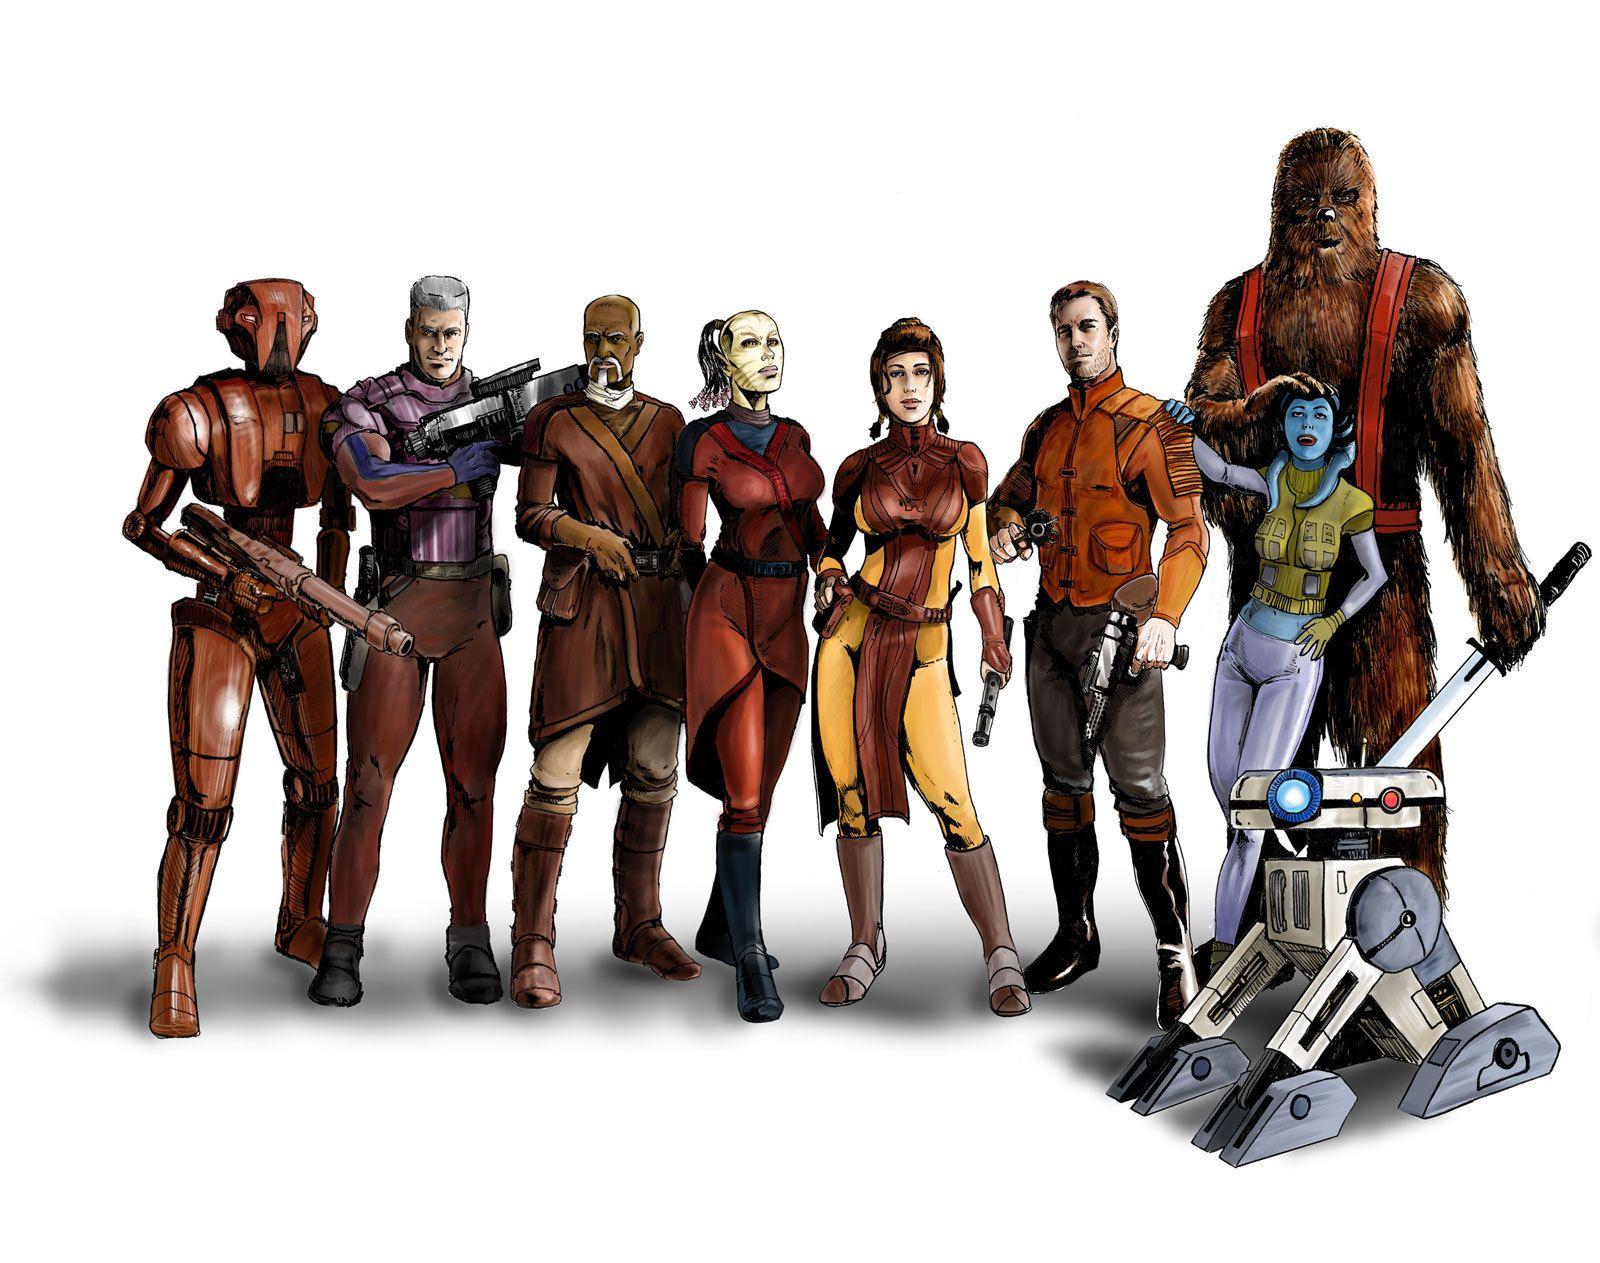 Star wars knights of the old republic wallpaper Gallery